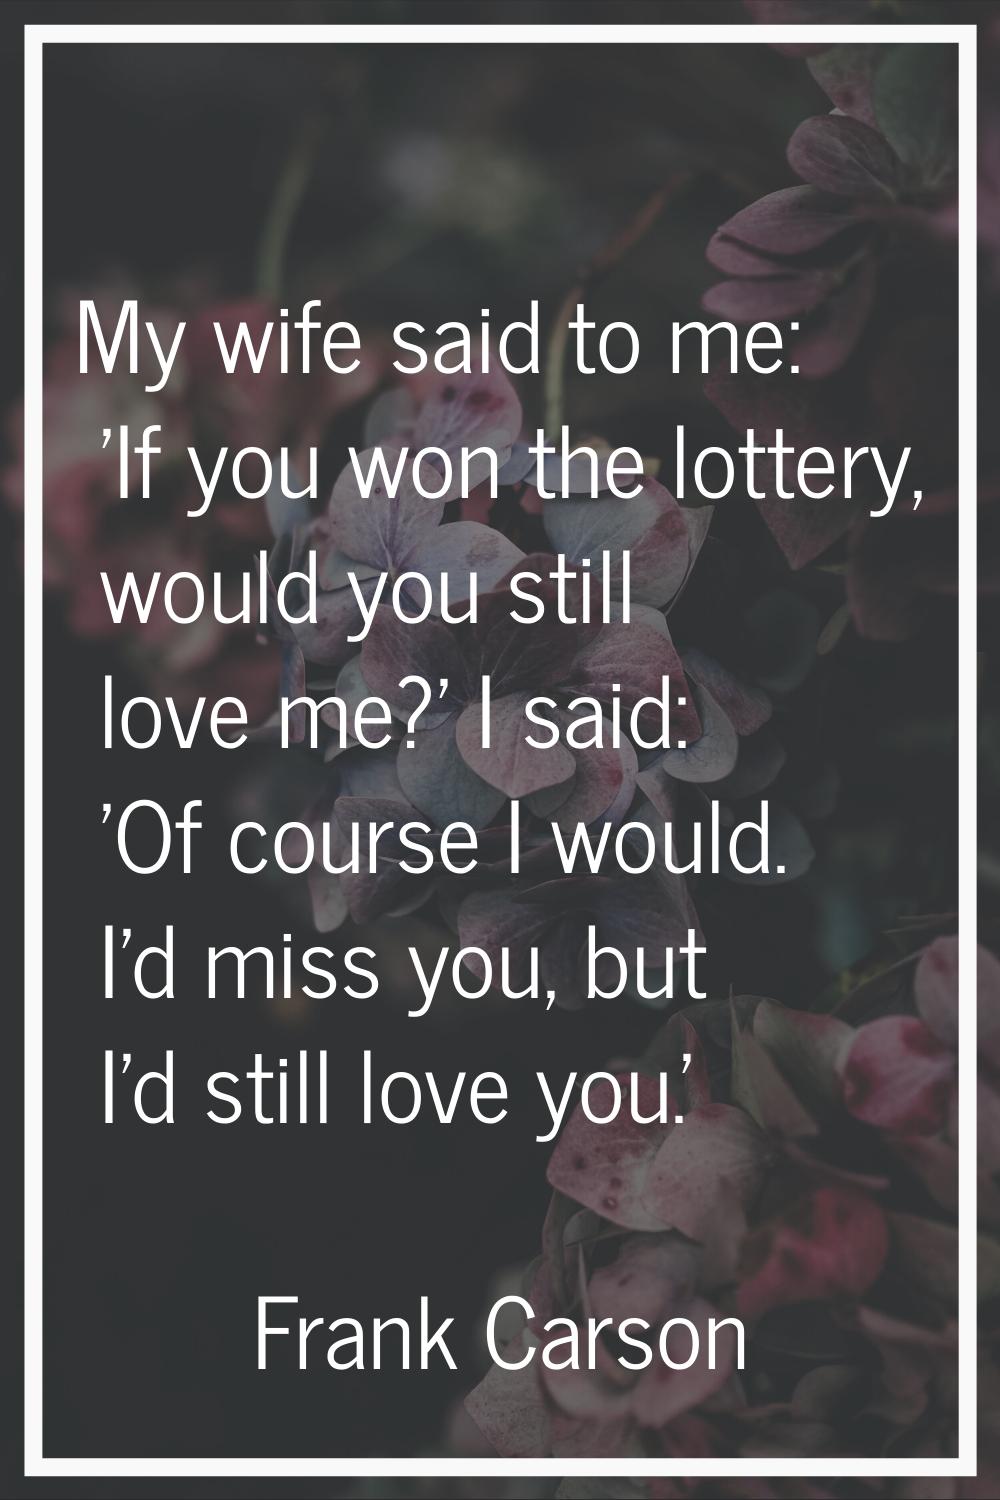 My wife said to me: 'If you won the lottery, would you still love me?' I said: 'Of course I would. 